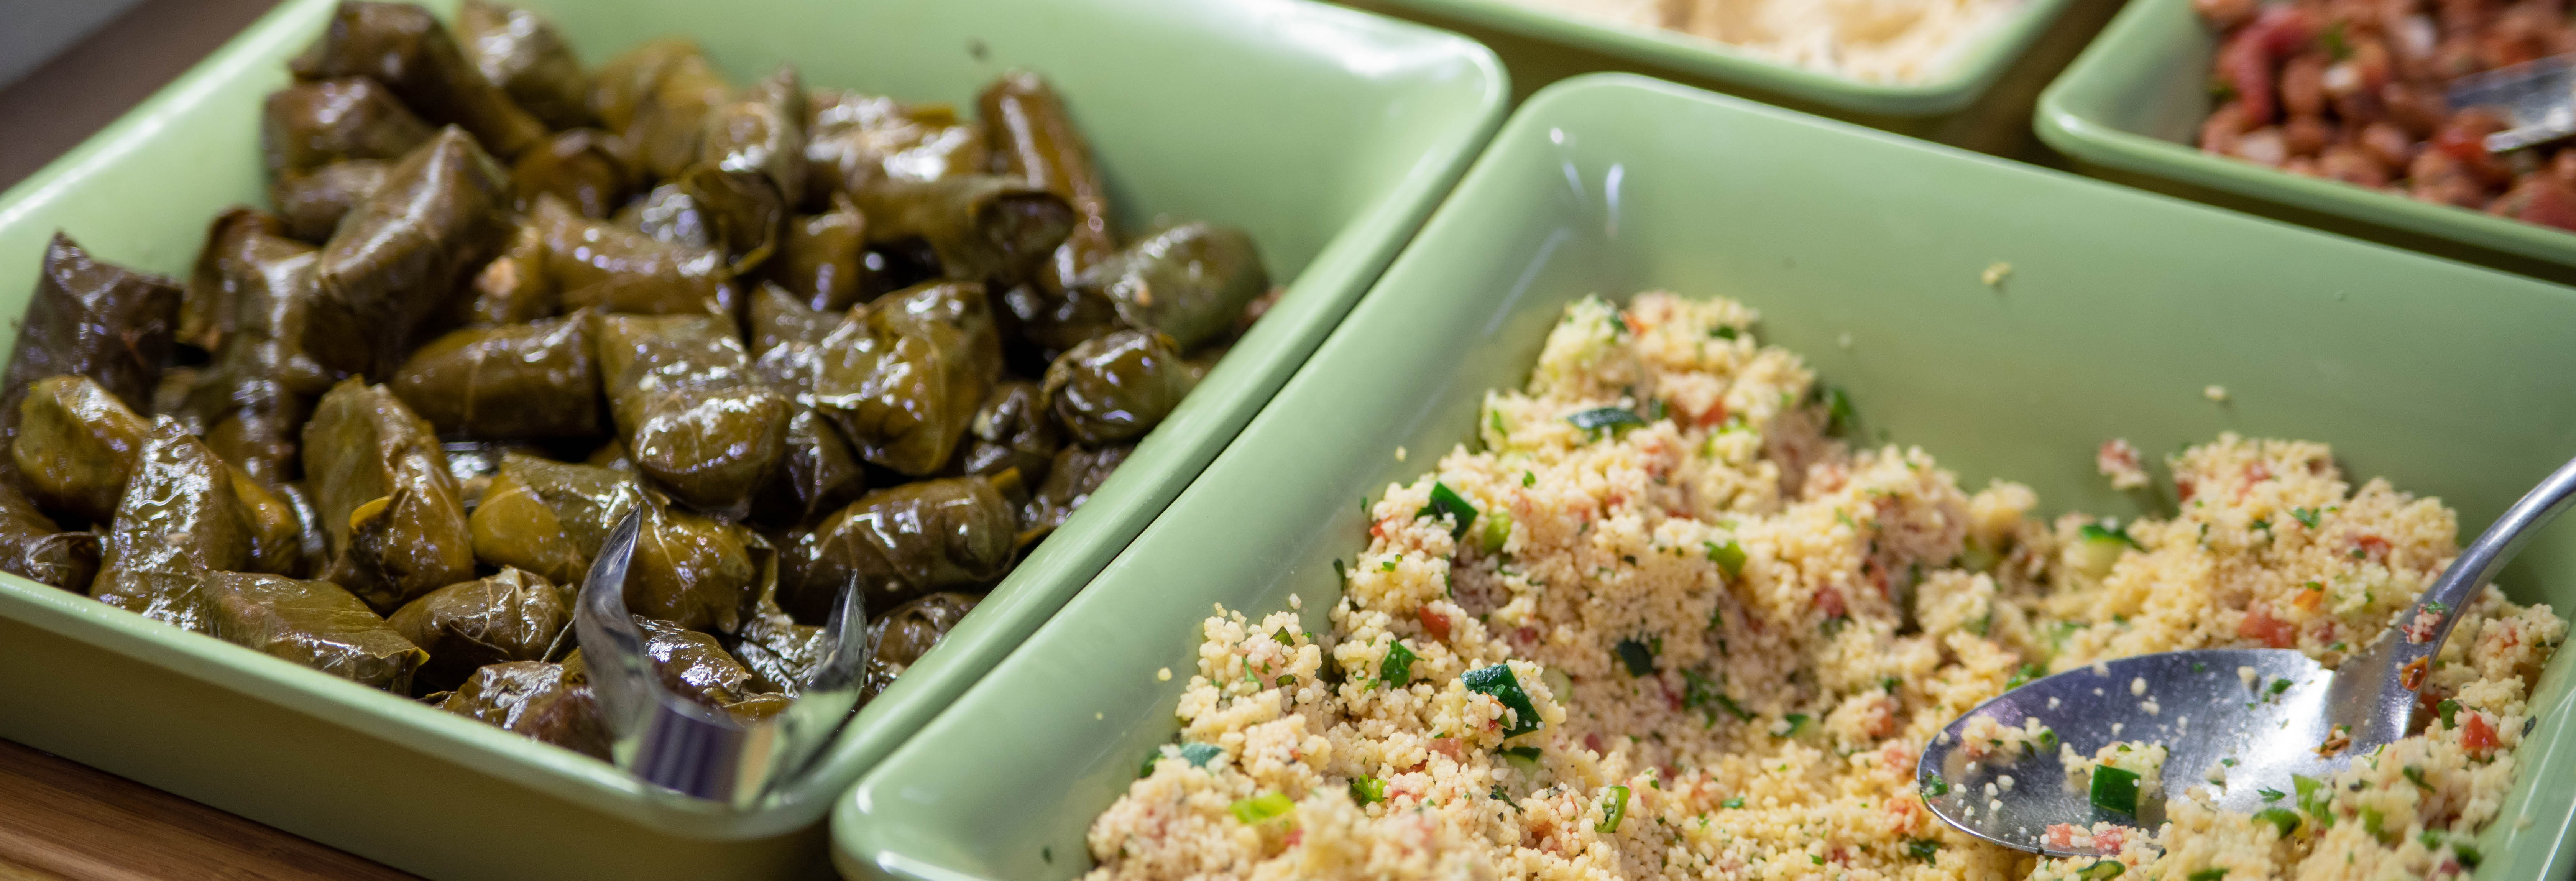 Photo of stuffed grape leaves and couscous.